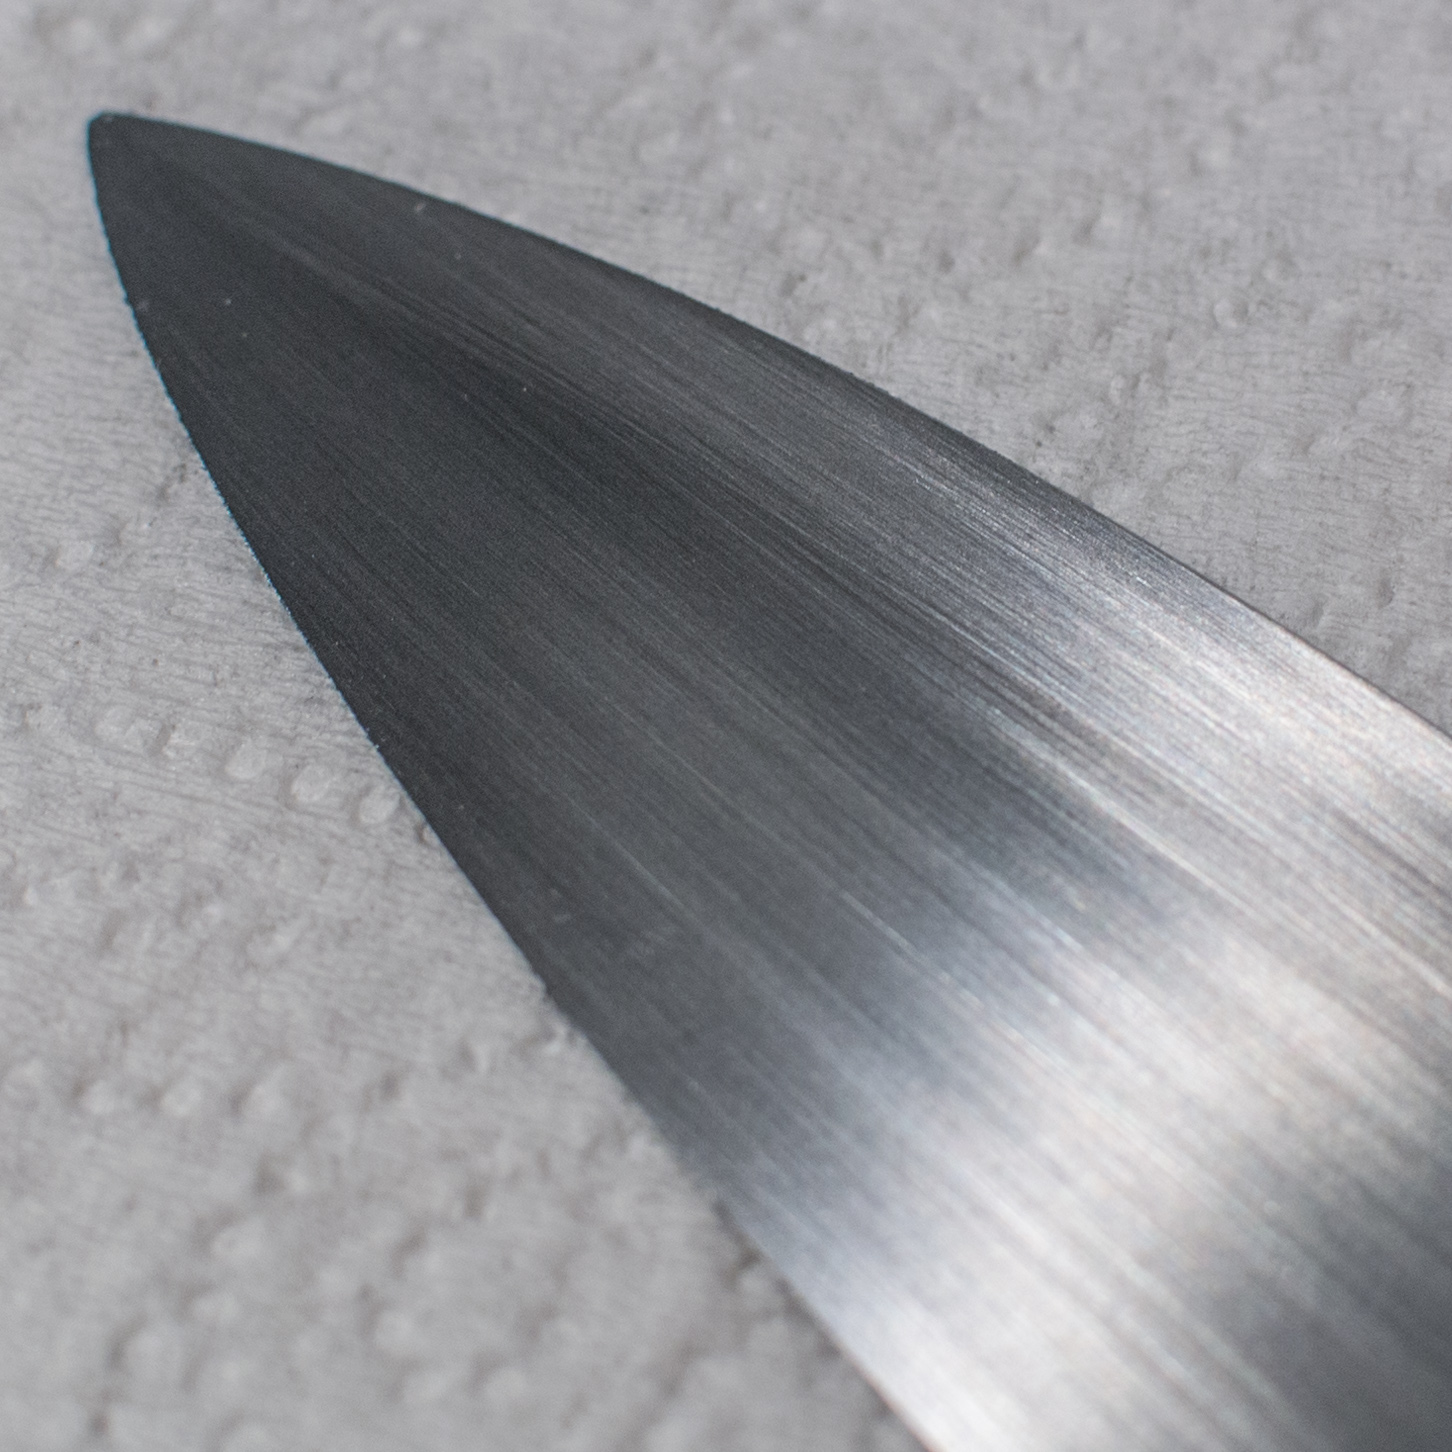 Knifemaking for beginners: Project #3 - Petit Gyuto Kitchen Knife